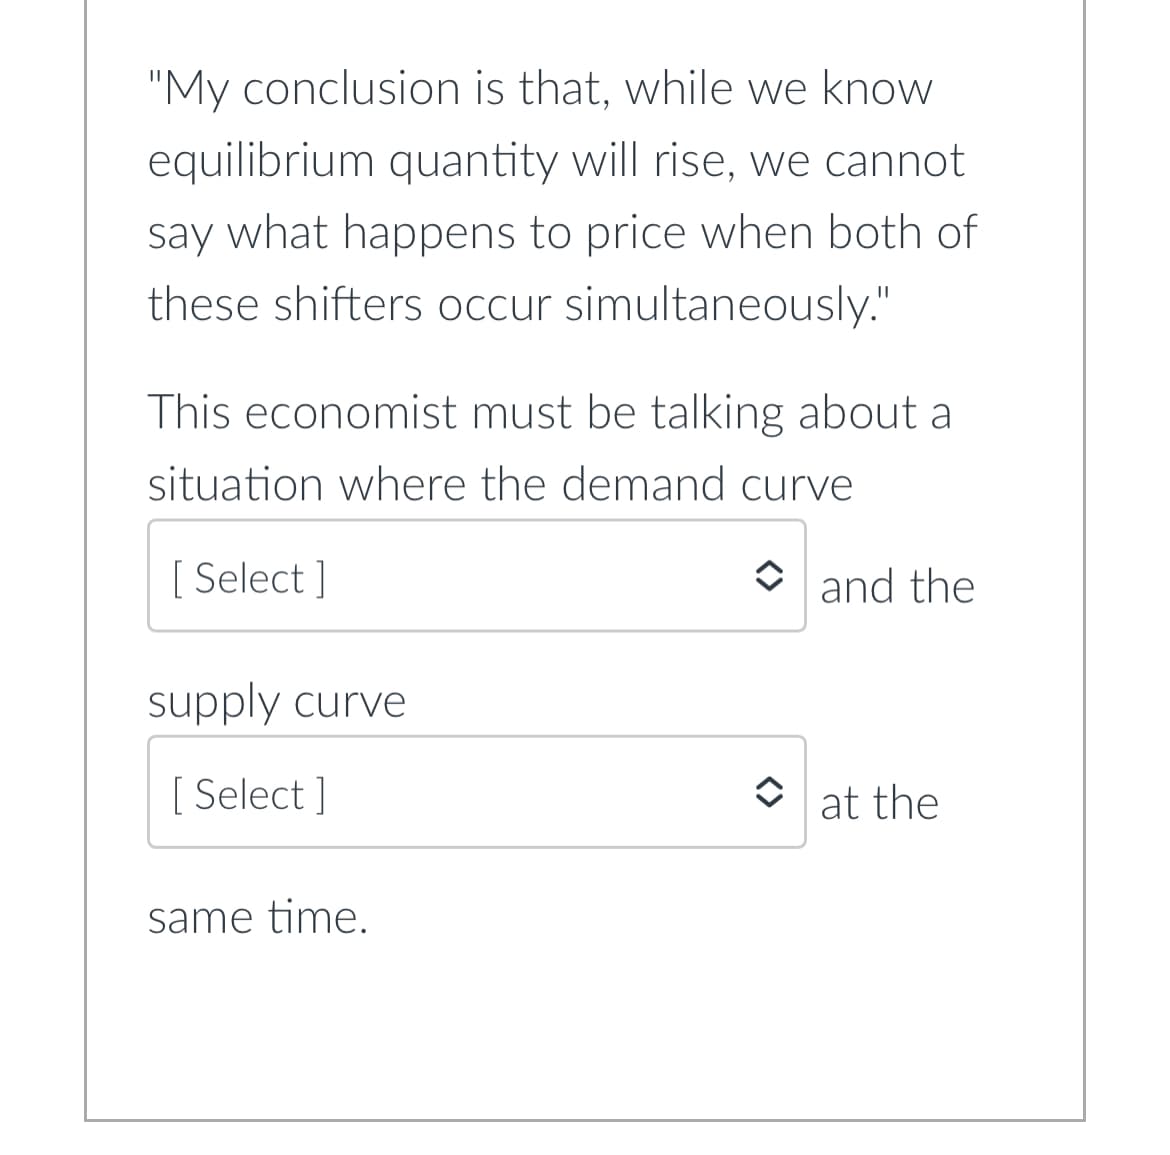 "My conclusion is that, while we know
equilibrium quantity will rise, we cannot
say what happens to price when both of
these shifters occur simultaneously."
This economist must be talking about a
situation where the demand curve
[ Select]
supply curve
[ Select]
same time.
and the
at the